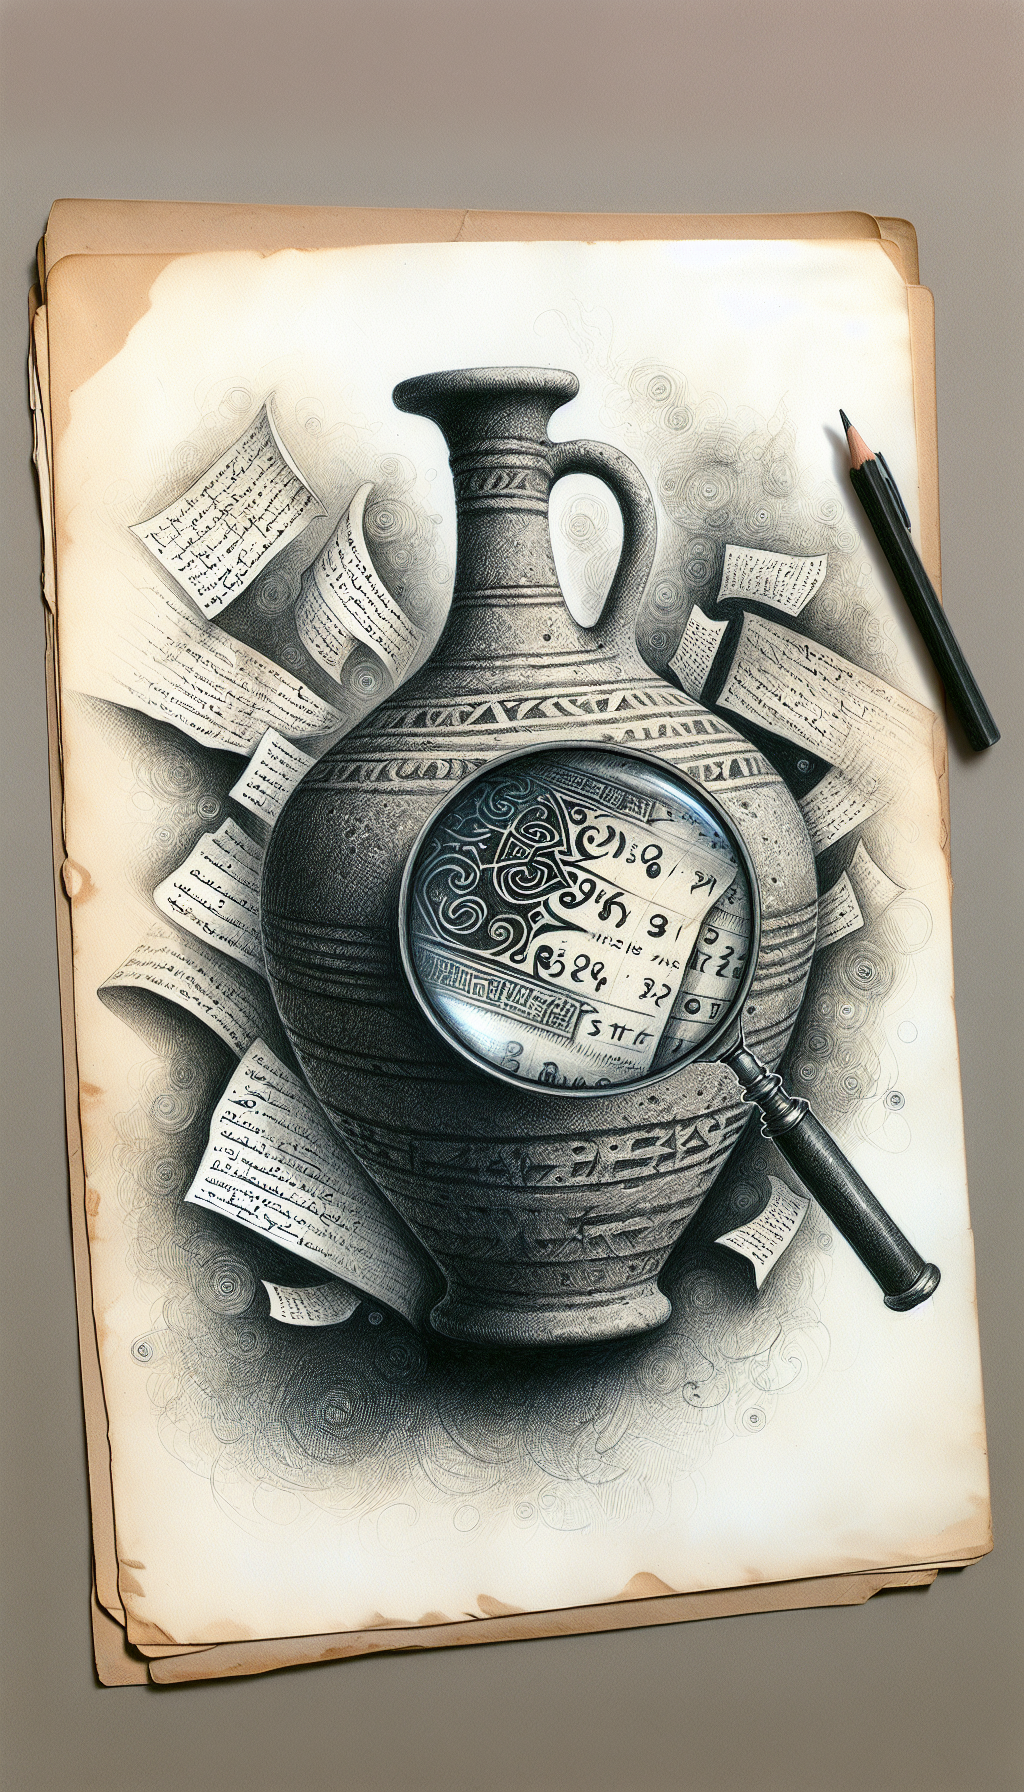 An intricate pencil sketch depicts an old, textured stoneware jug, half-buried in faded ledger pages filled with calligraphy and cryptic symbols. A magnifying glass zooms in on the jug's maker's mark, where a ghosted price tag flutters, showcasing a hefty sum. Styles converge, blending vintage etching with bursts of watercolor to signify the jug's rich history and value.